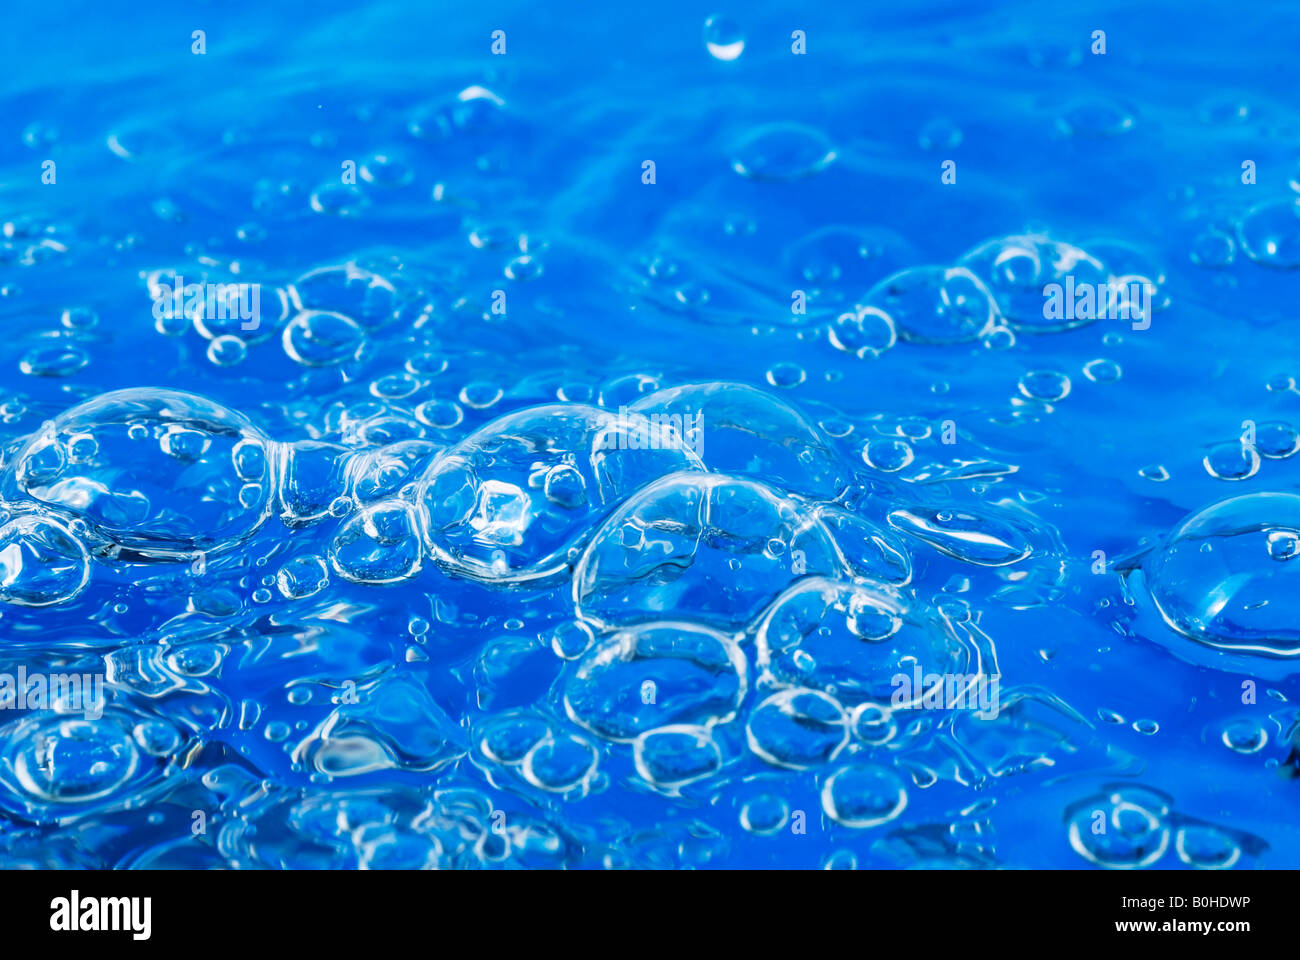 Water bubbles, blue Stock Photo